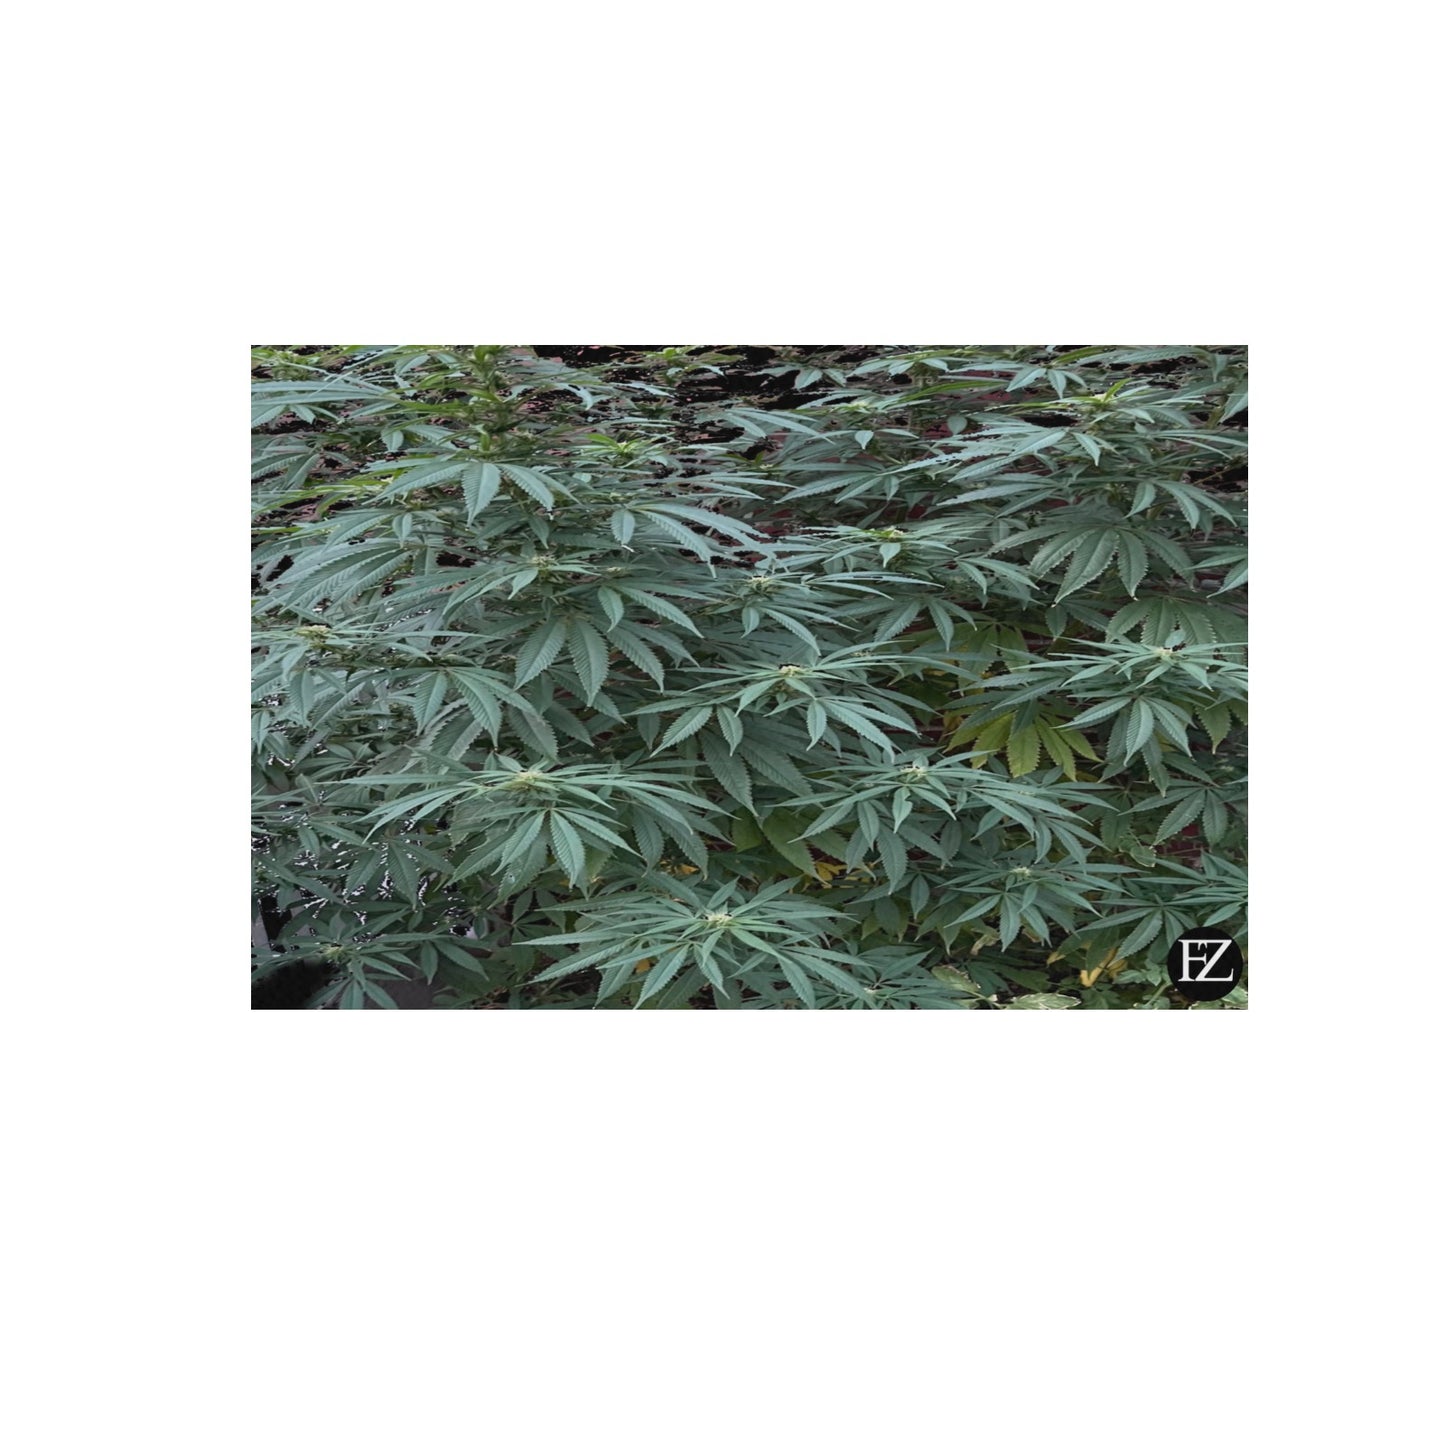 fz weed portrait upgraded frame canvas print 48"x32"(made in queen)